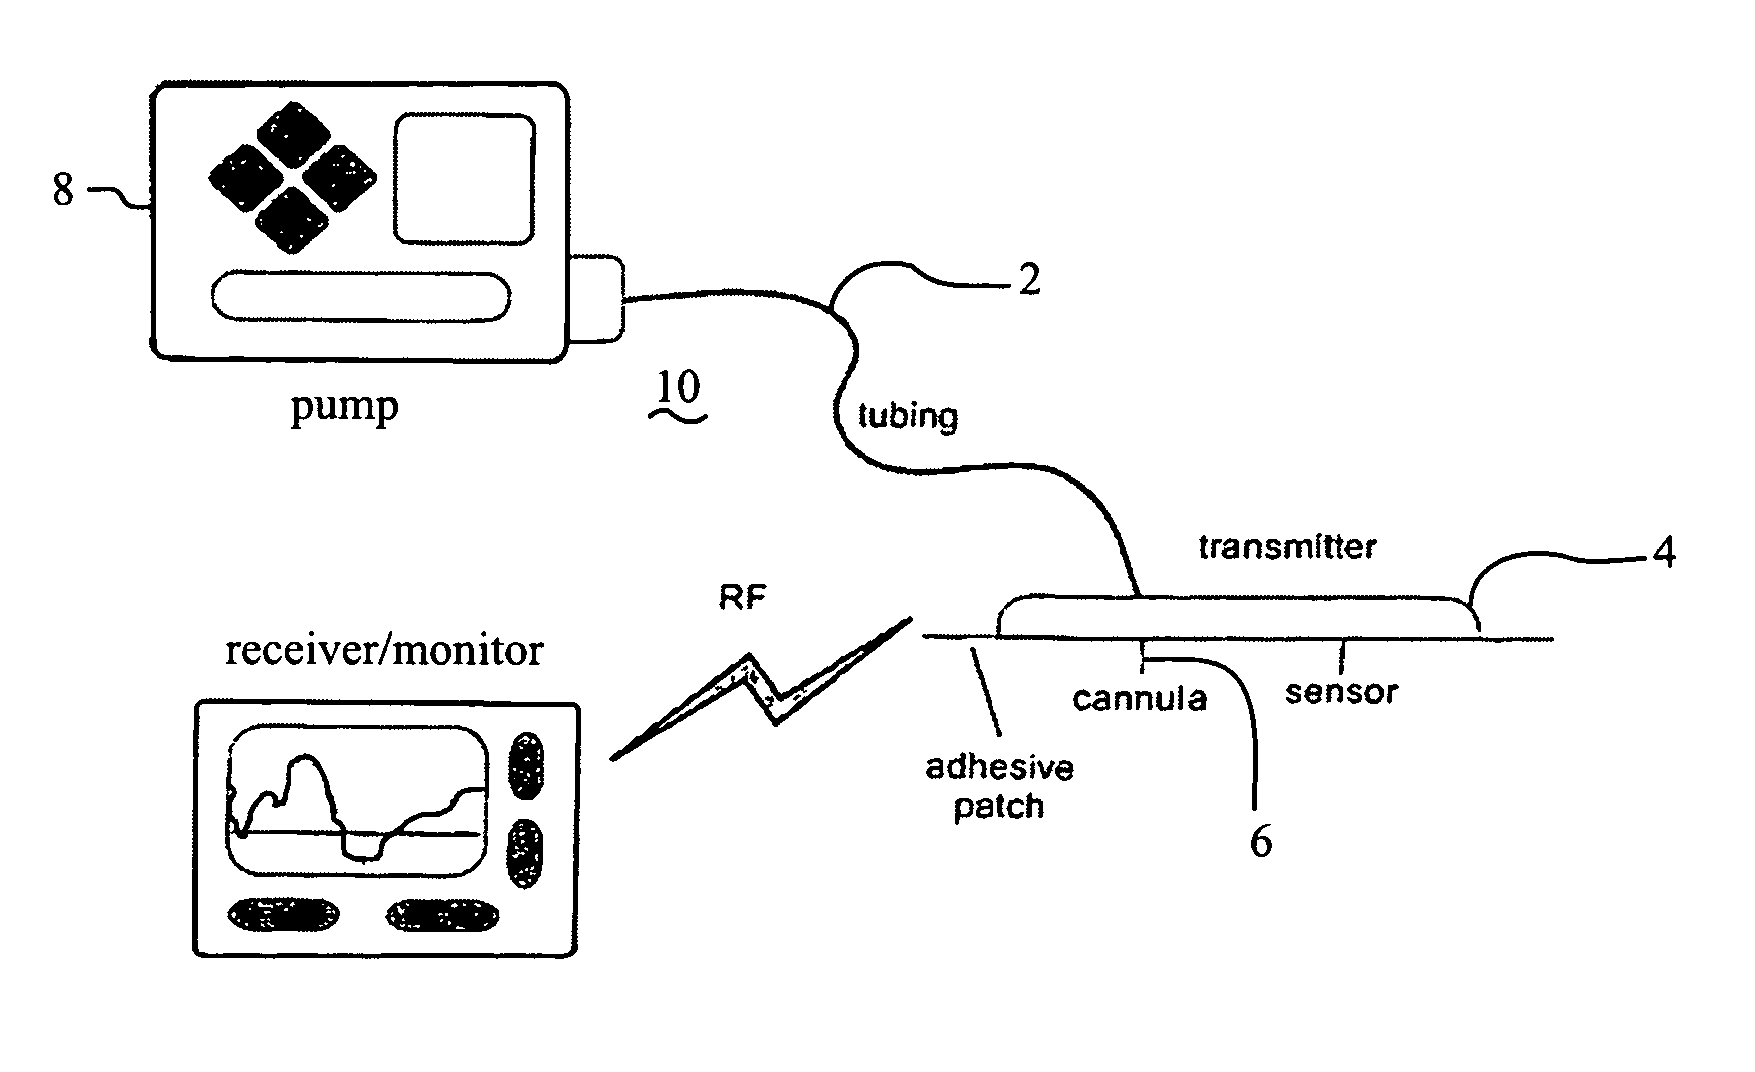 Infusion sets for the delivery of a therapeutic substance to a patient